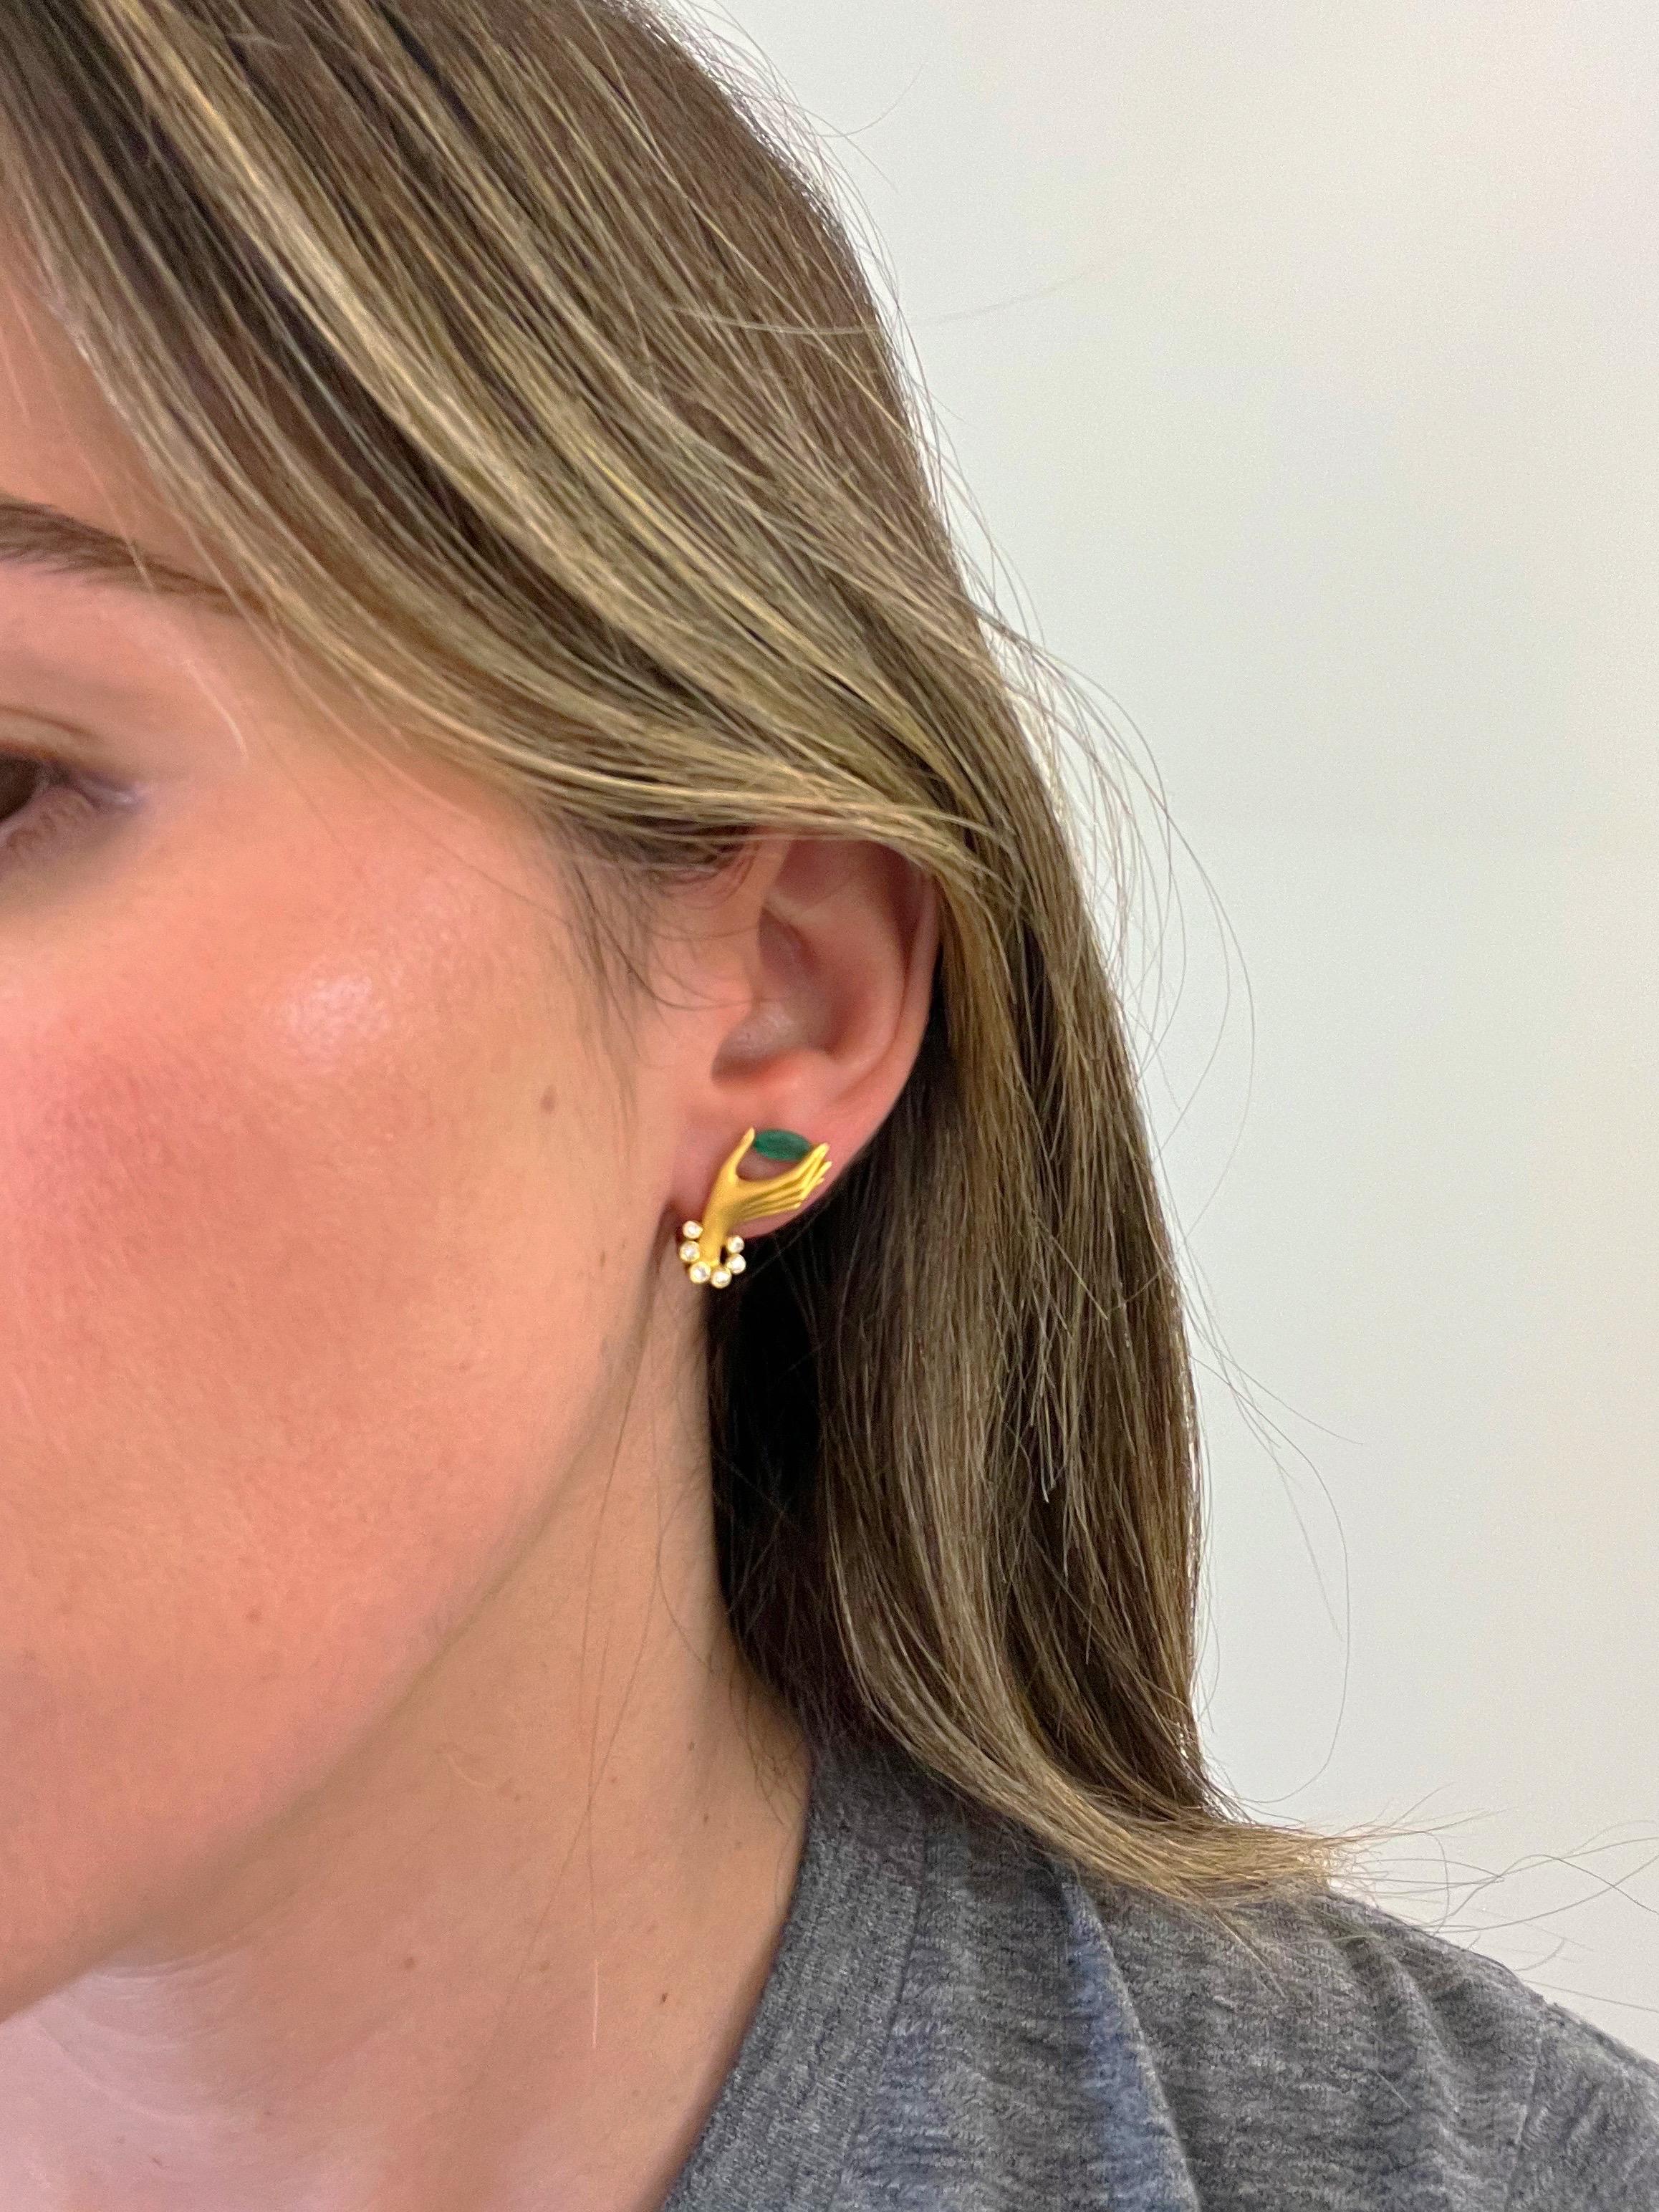 Carrera Y Carrera has built its its famous name on figurative designs, an obsession with surface finishes, and a compelling way of seeing beauty in art and nature.
These 18 karat yellow gold earrings are a perfect example of Carrera's iconic